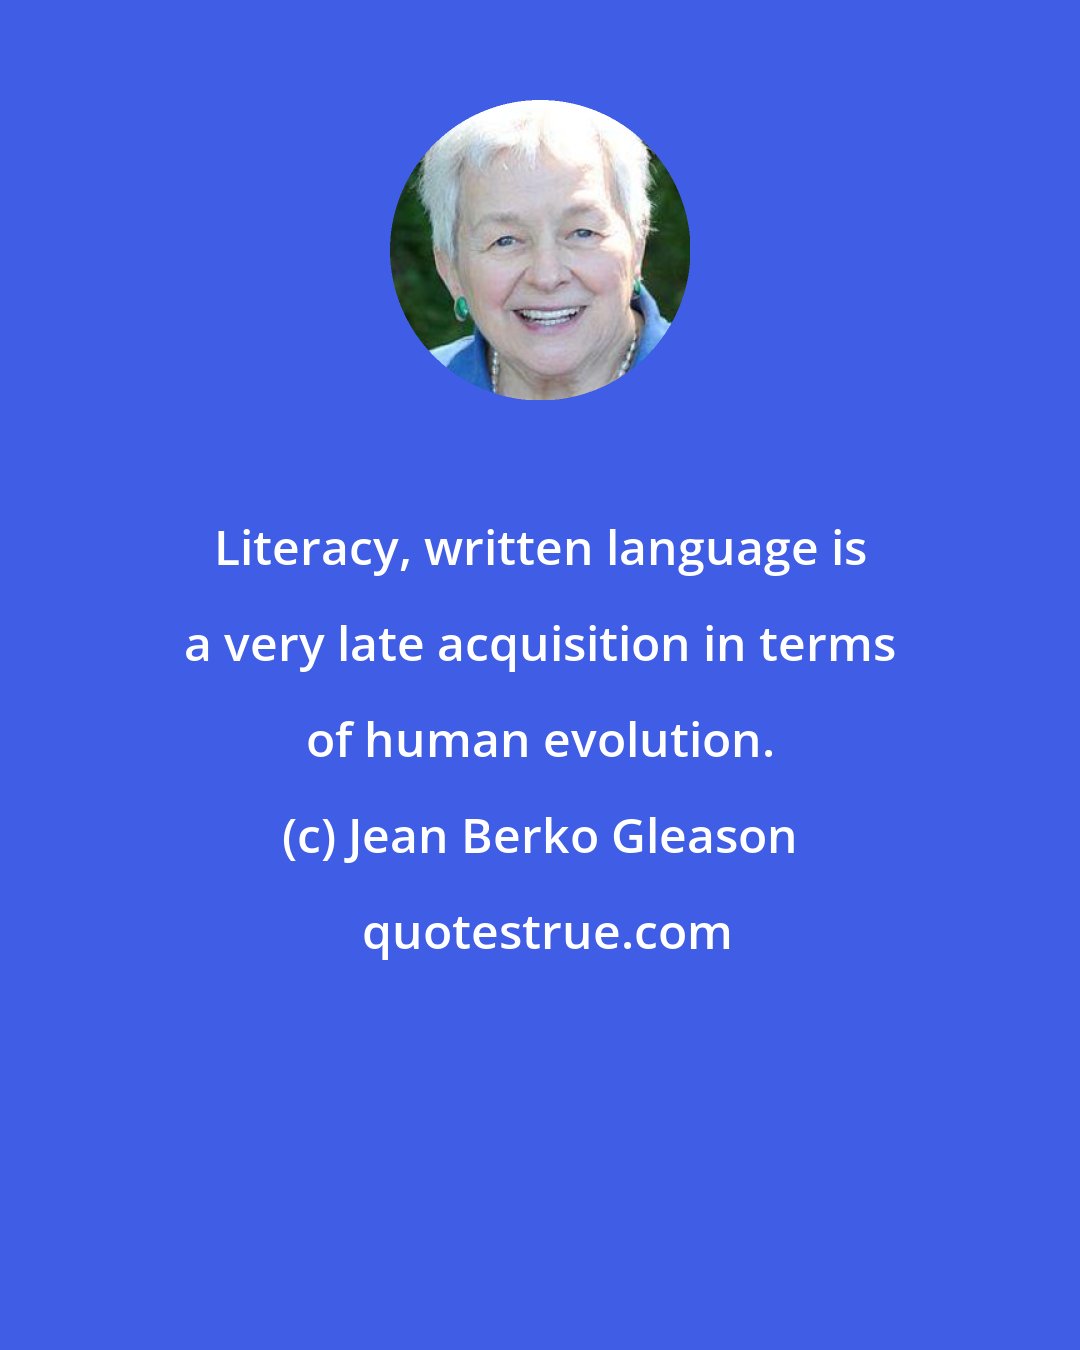 Jean Berko Gleason: Literacy, written language is a very late acquisition in terms of human evolution.